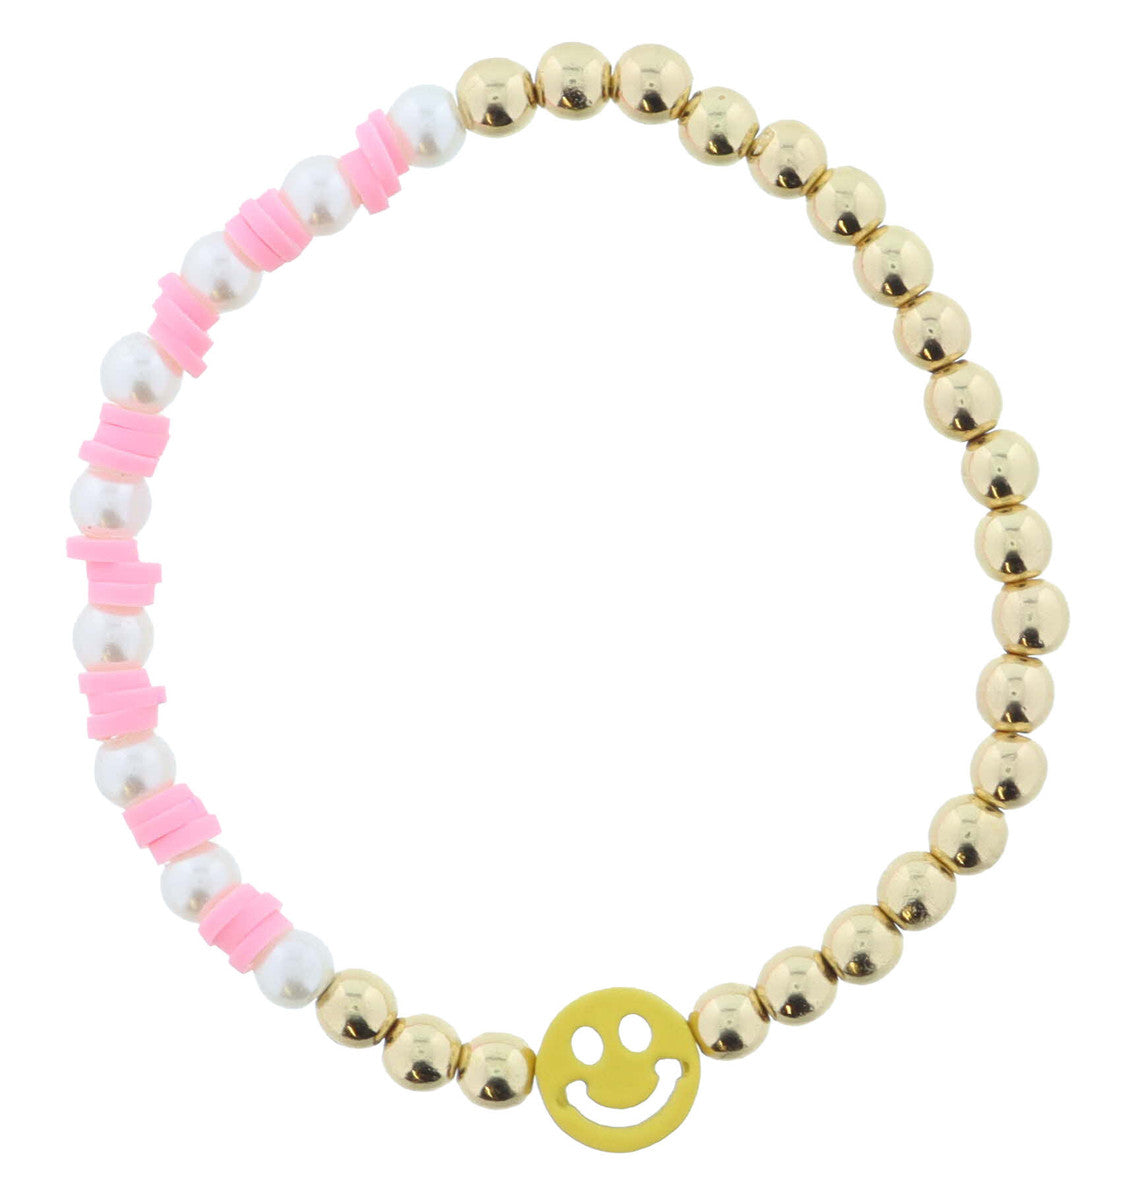 KIDS HALF PINK SEQUINS AND PEARLS, HALF BEADS WITH YELLOW HAPPY FACE BRACELET